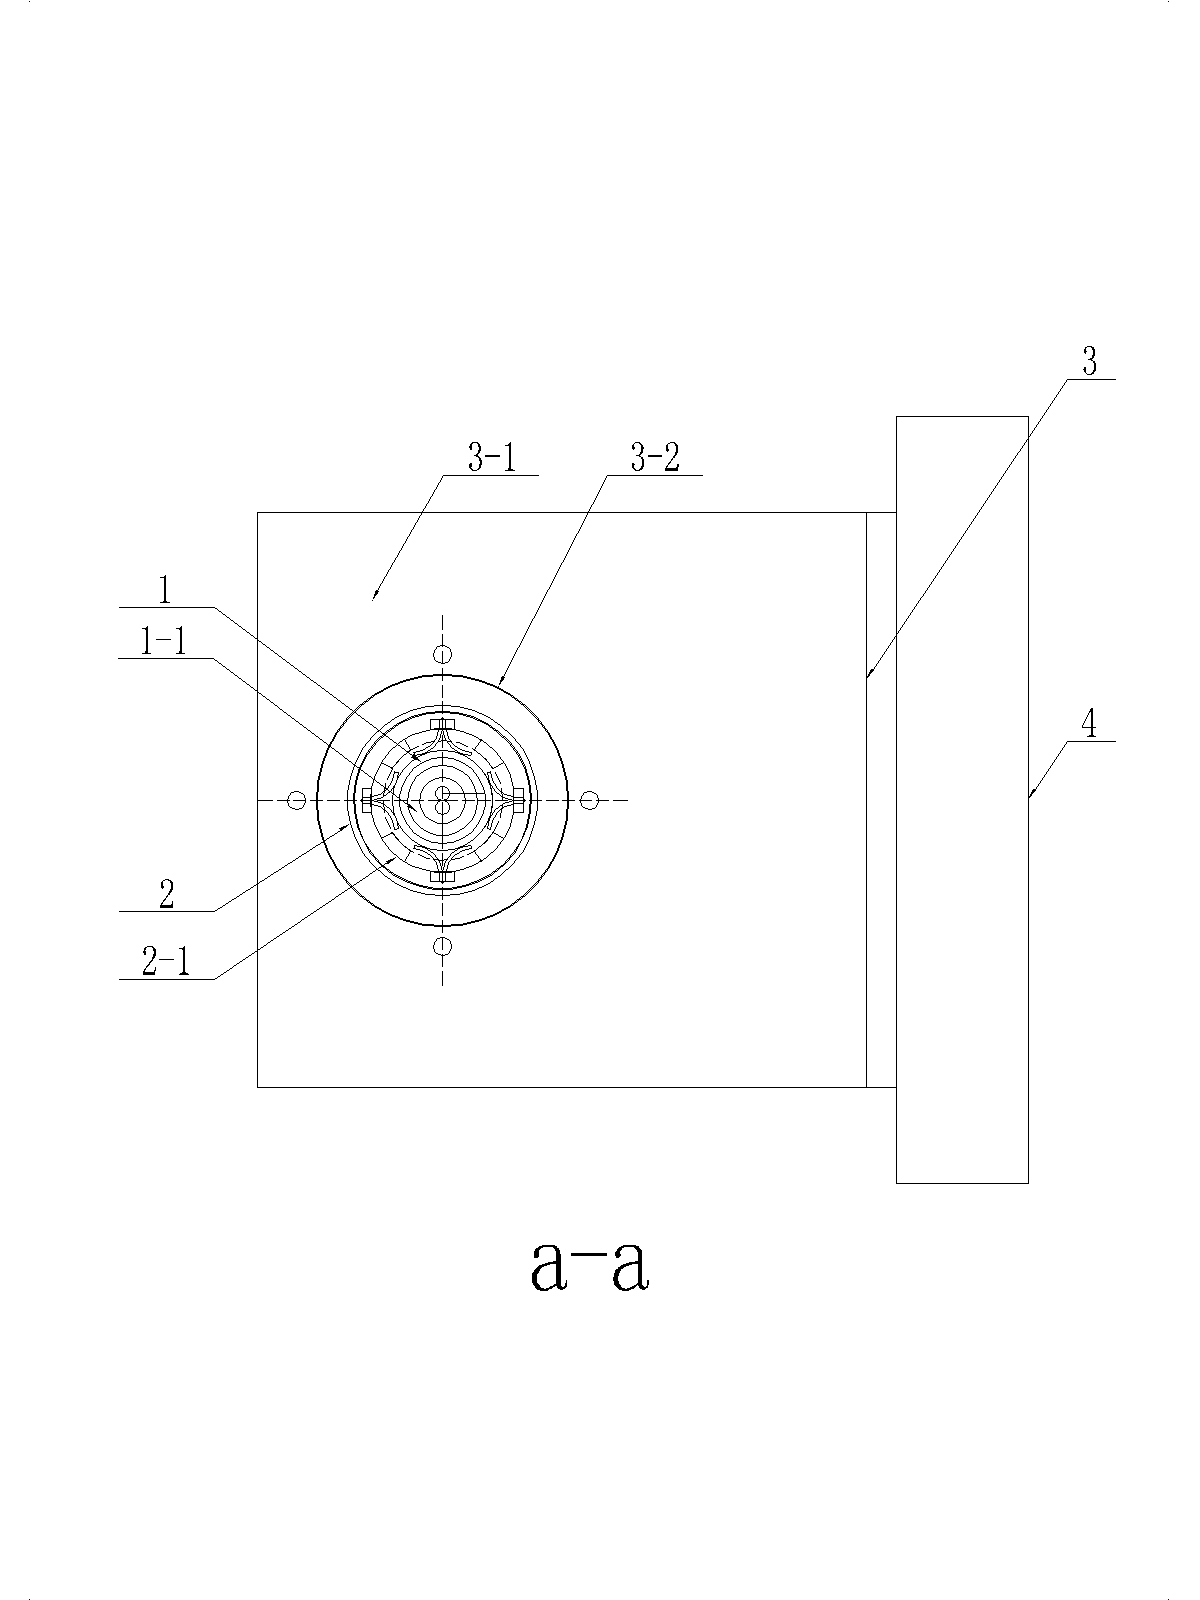 Data conduction extension device for turnover light-emitting diode (LED) studio screen